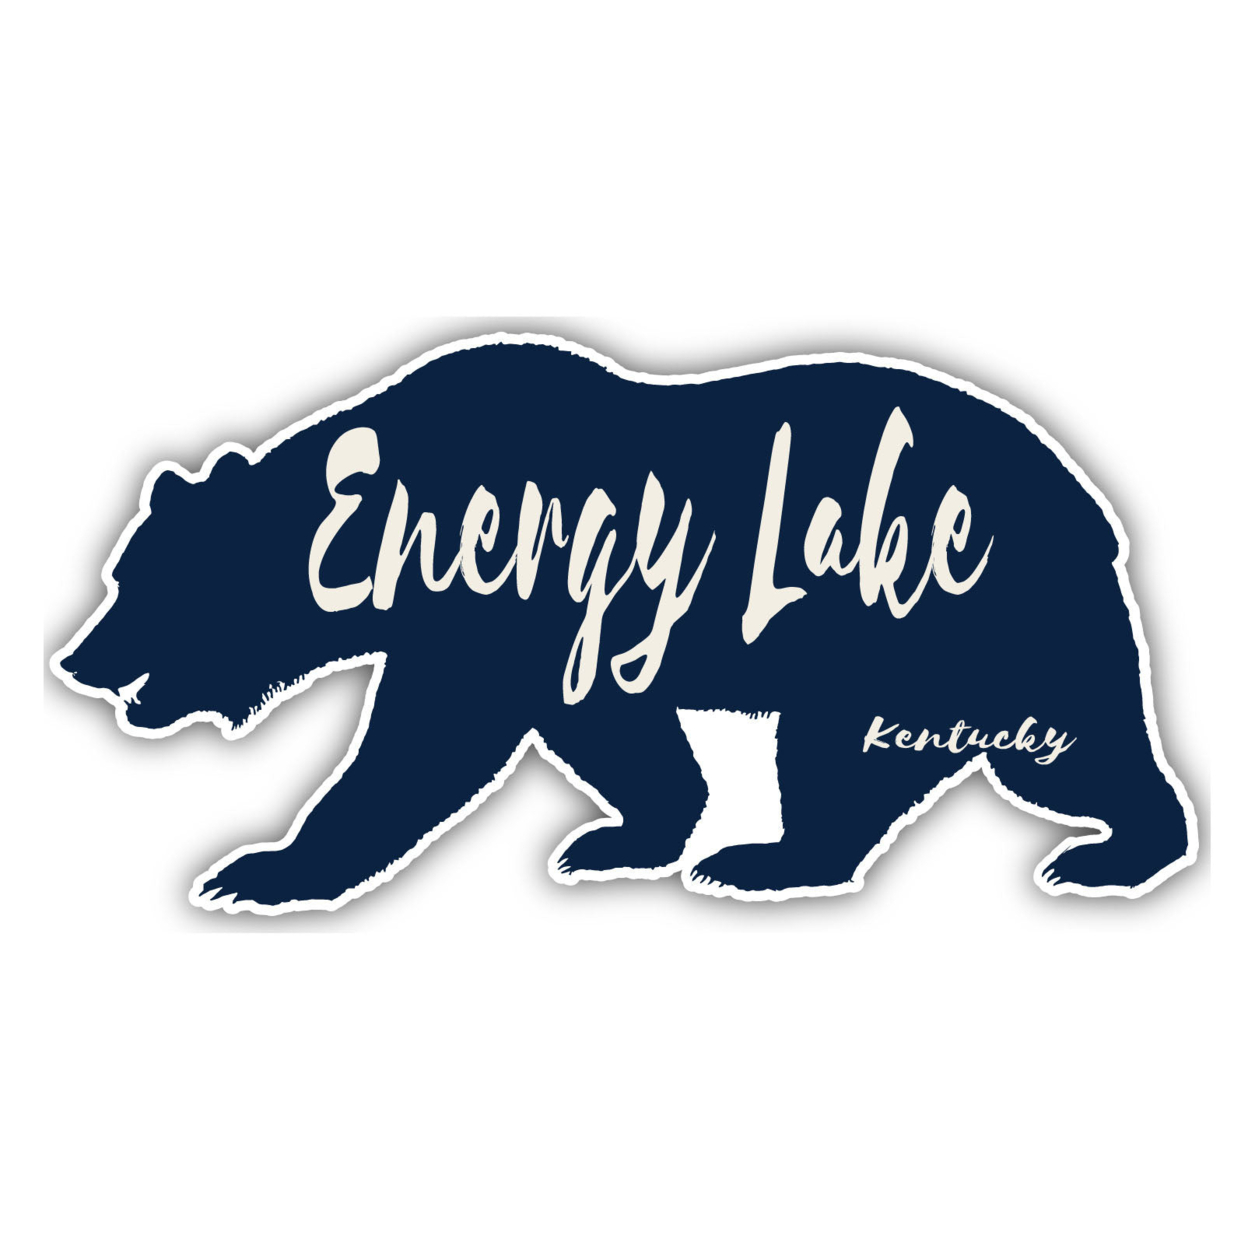 Energy Lake Kentucky Souvenir Decorative Stickers (Choose Theme And Size) - 4-Pack, 10-Inch, Bear